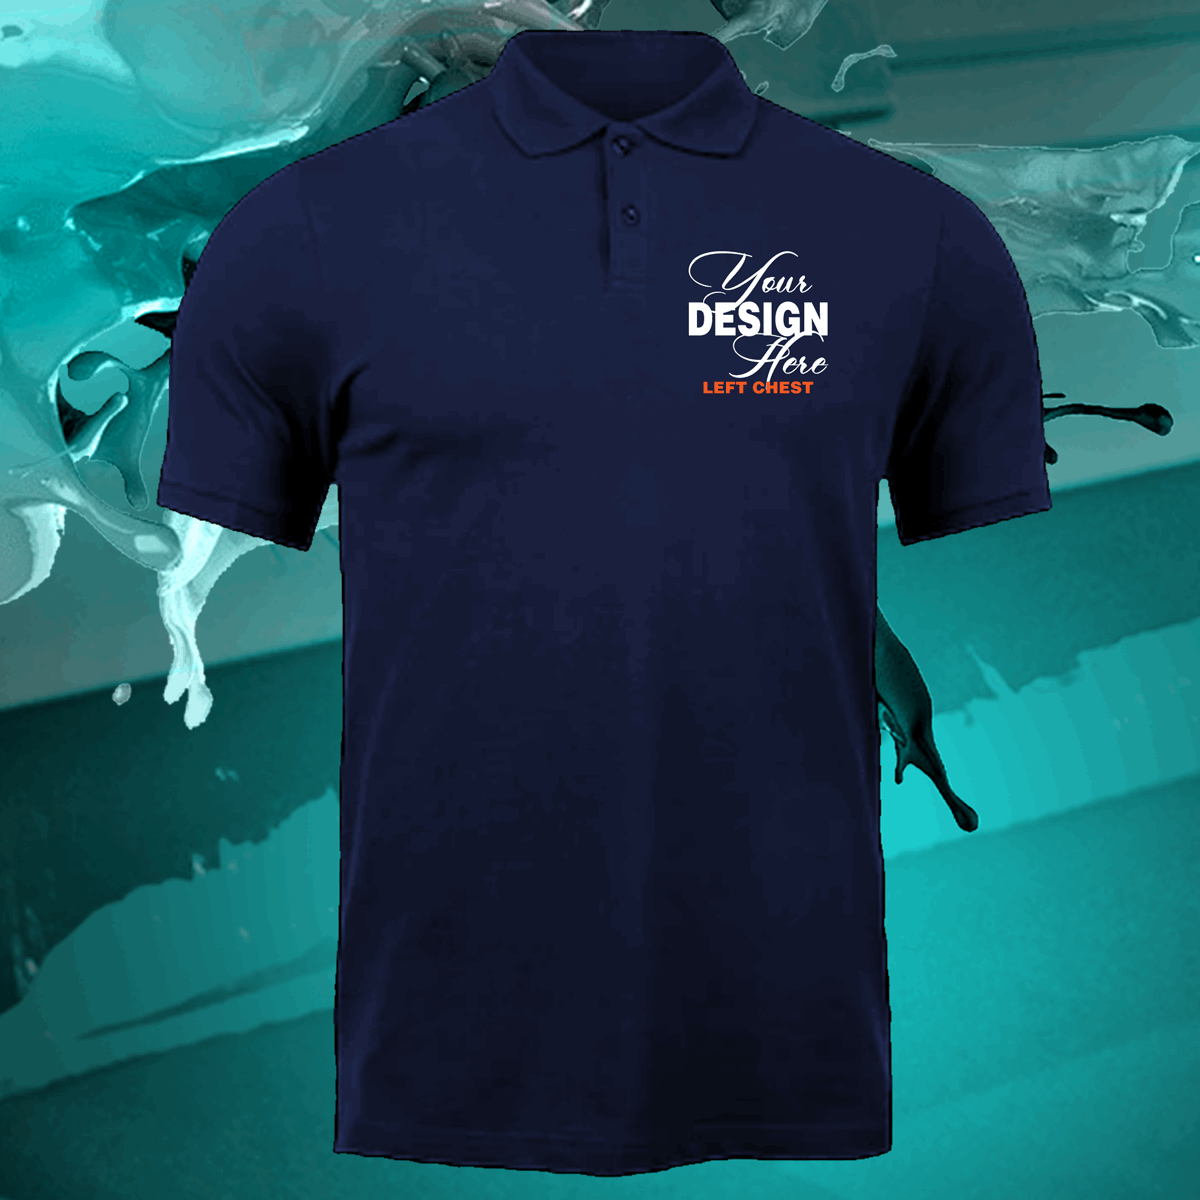 Custom Adult Polo Shirt great for Work or School Uniforms - Wilson Design Group